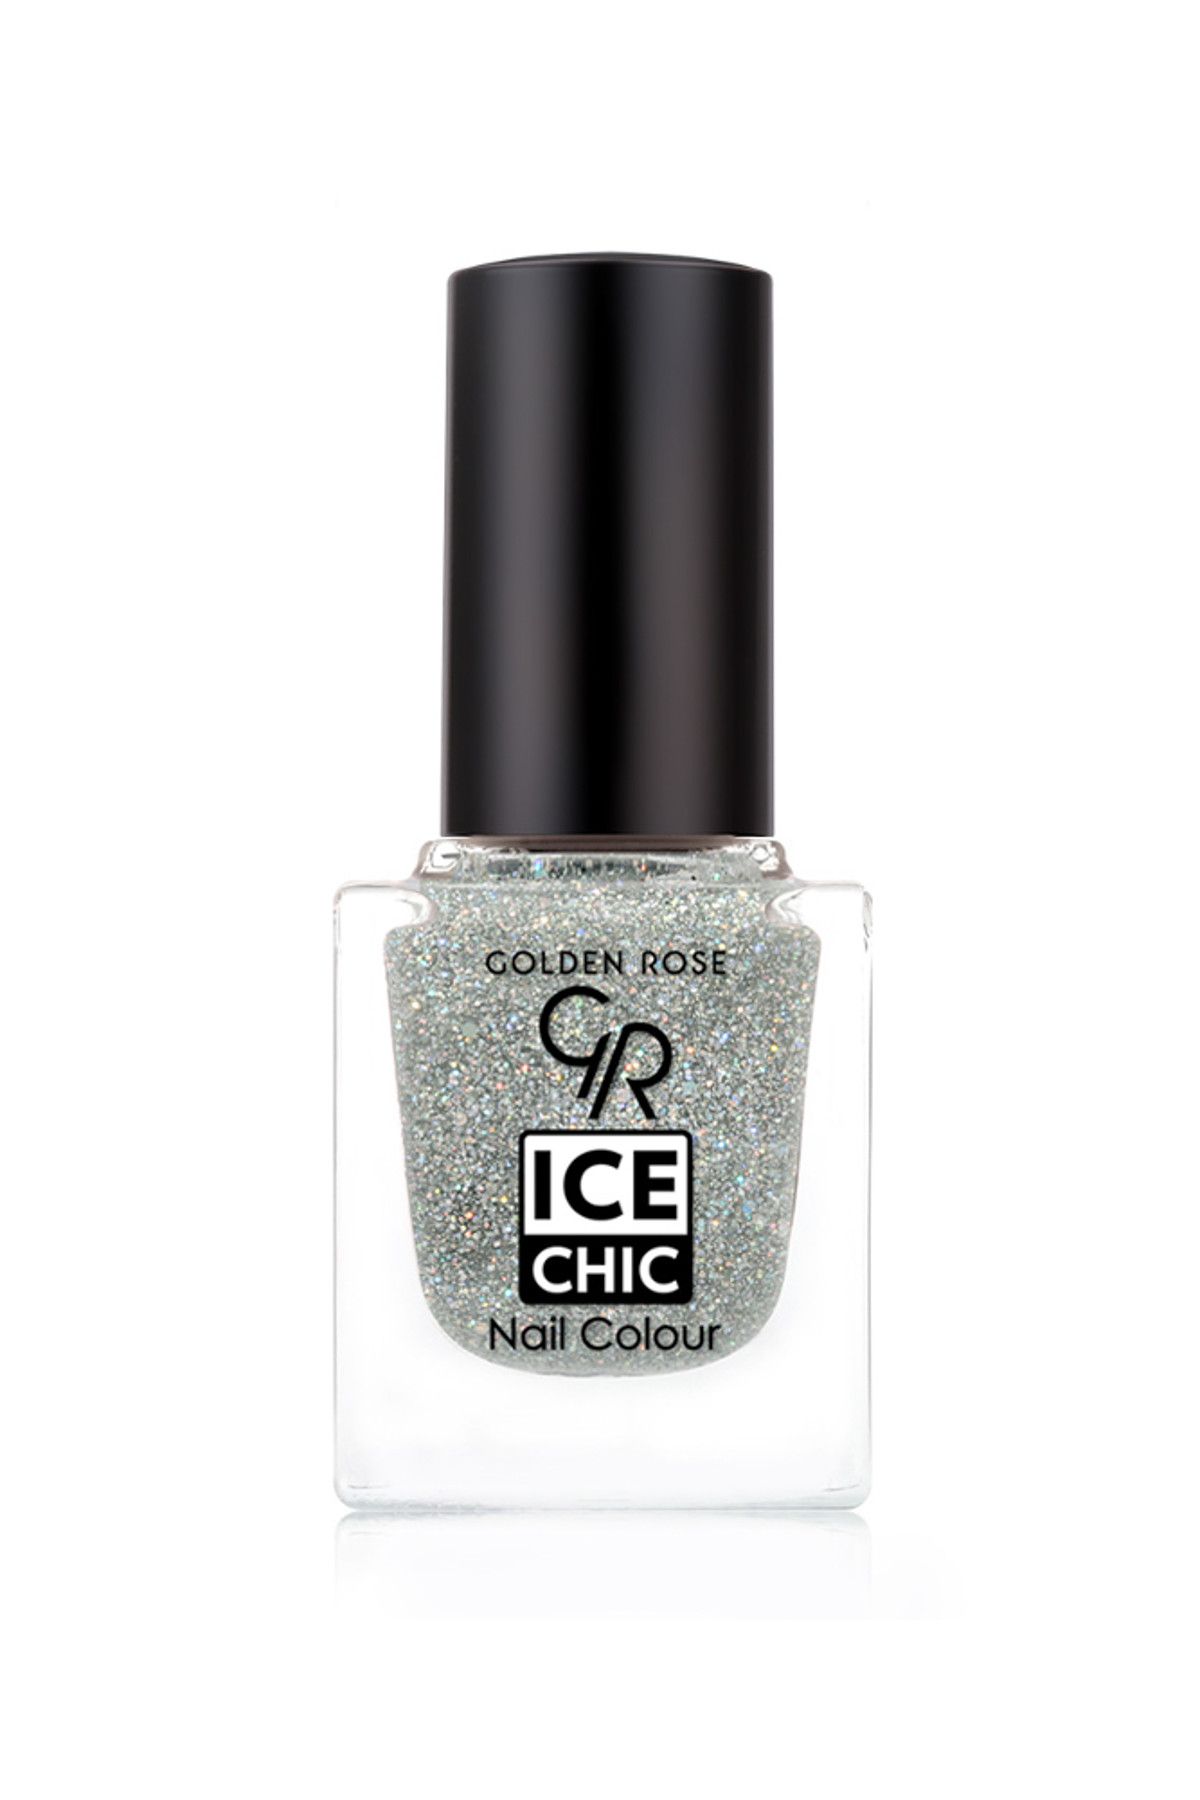 Golden Rose Oje - Ice Chic Nail Colour No: 107 8691190921071